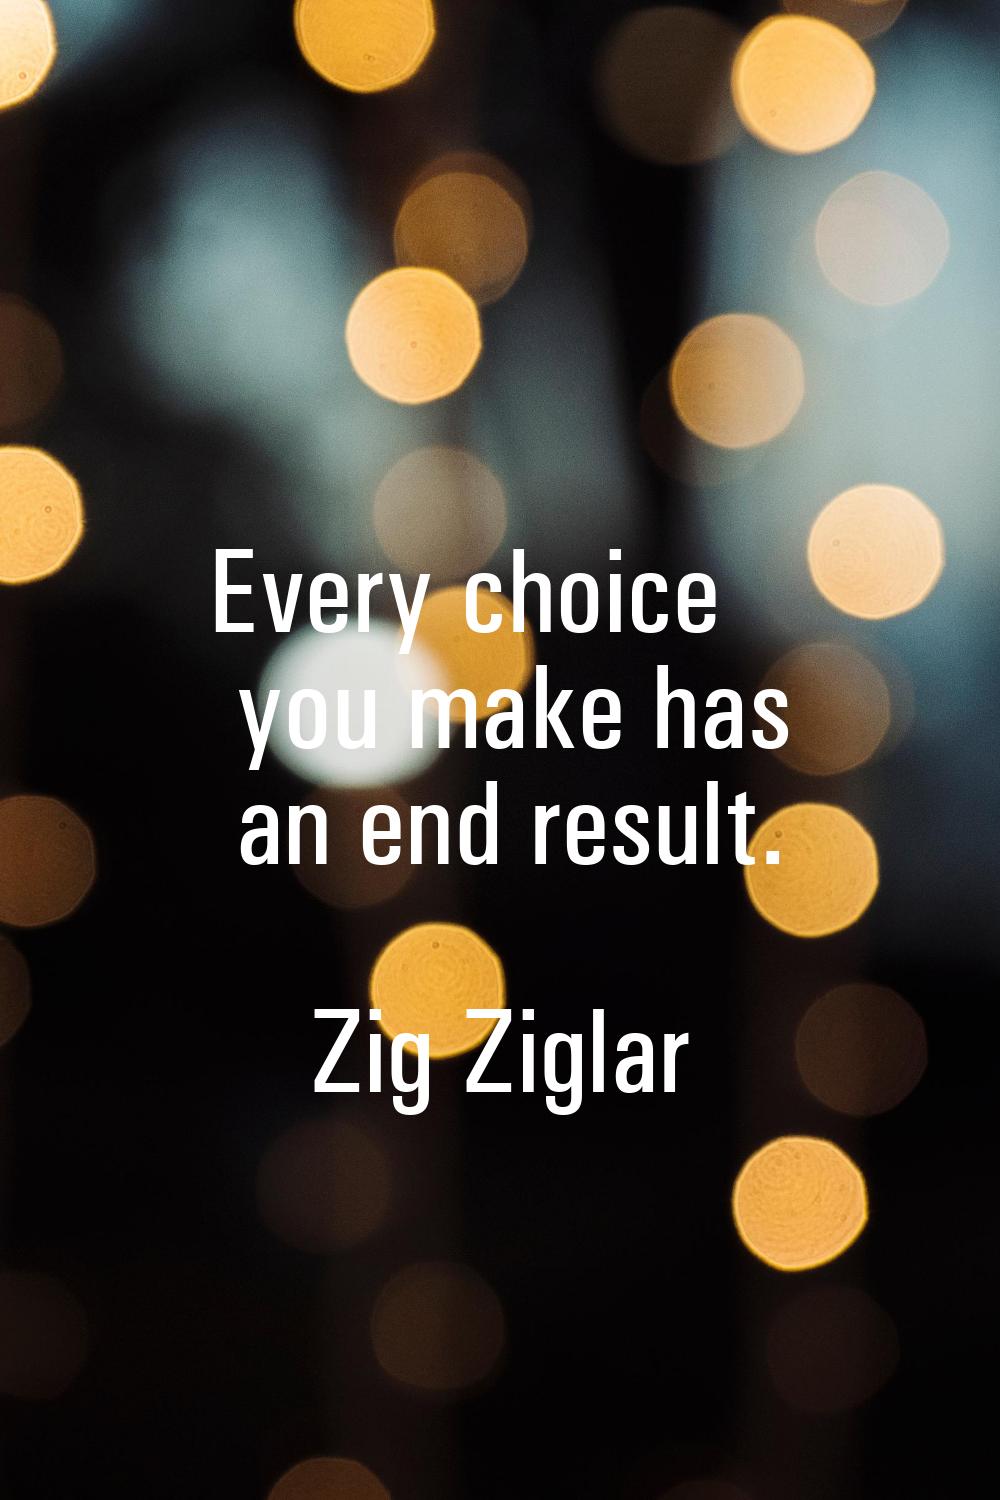 Every choice you make has an end result.